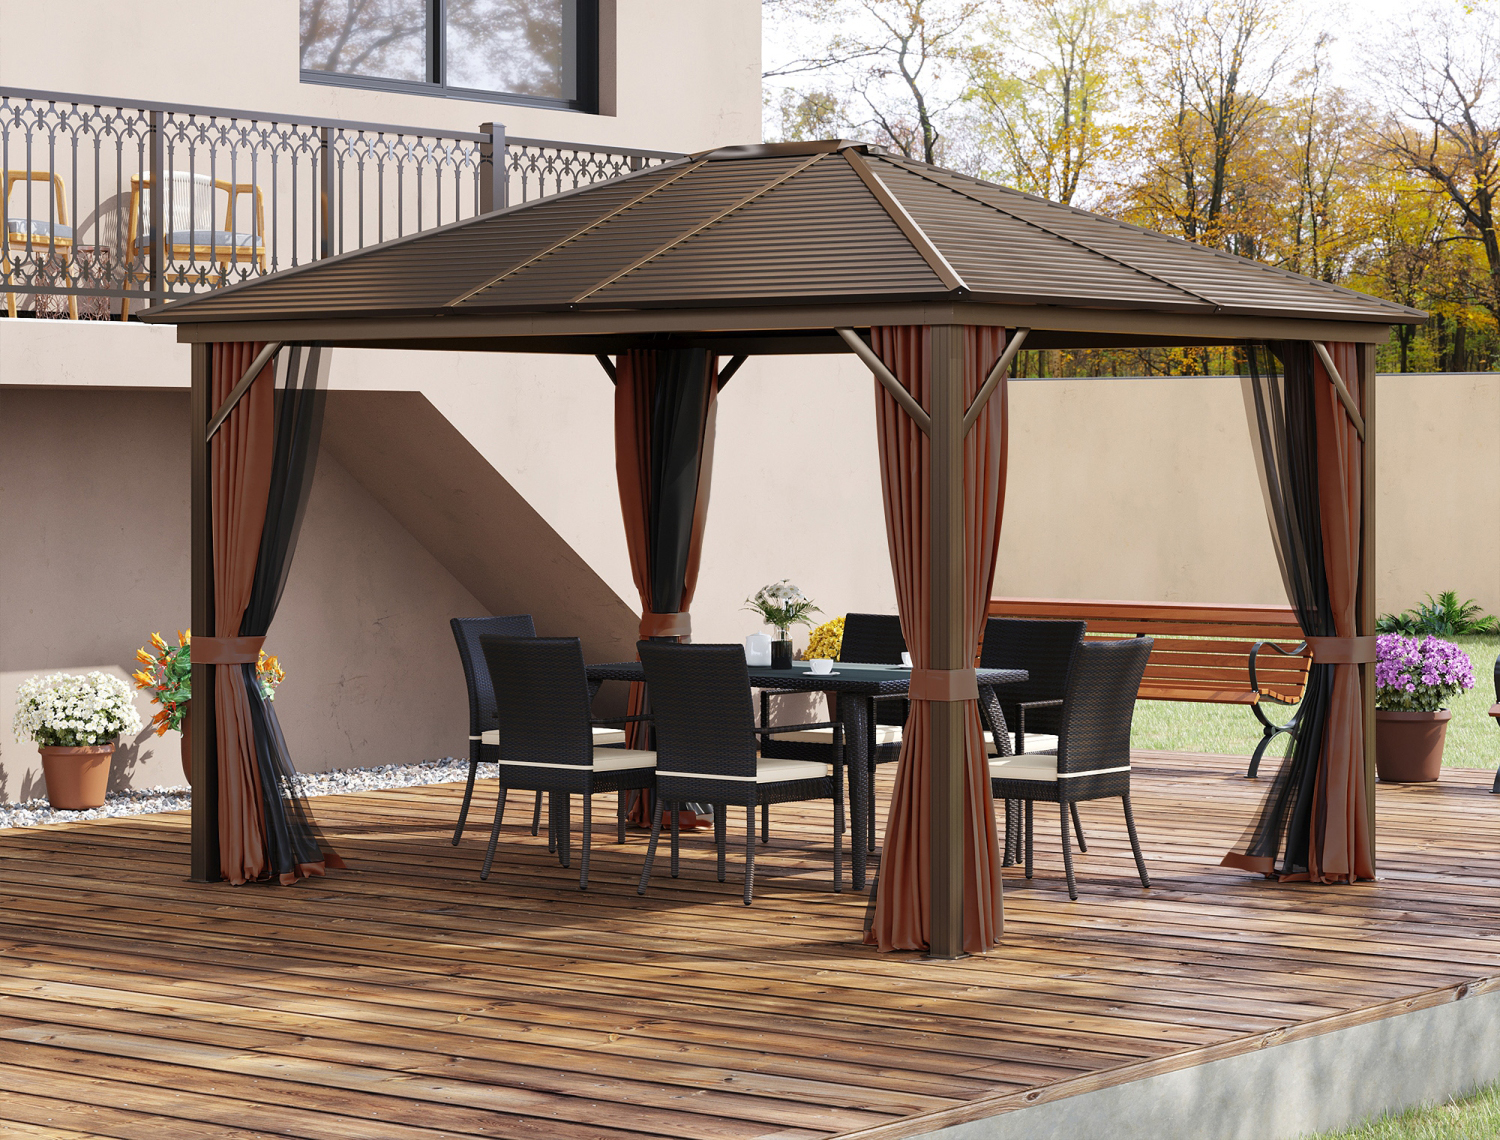 Gazebo and dining set on a patio deck